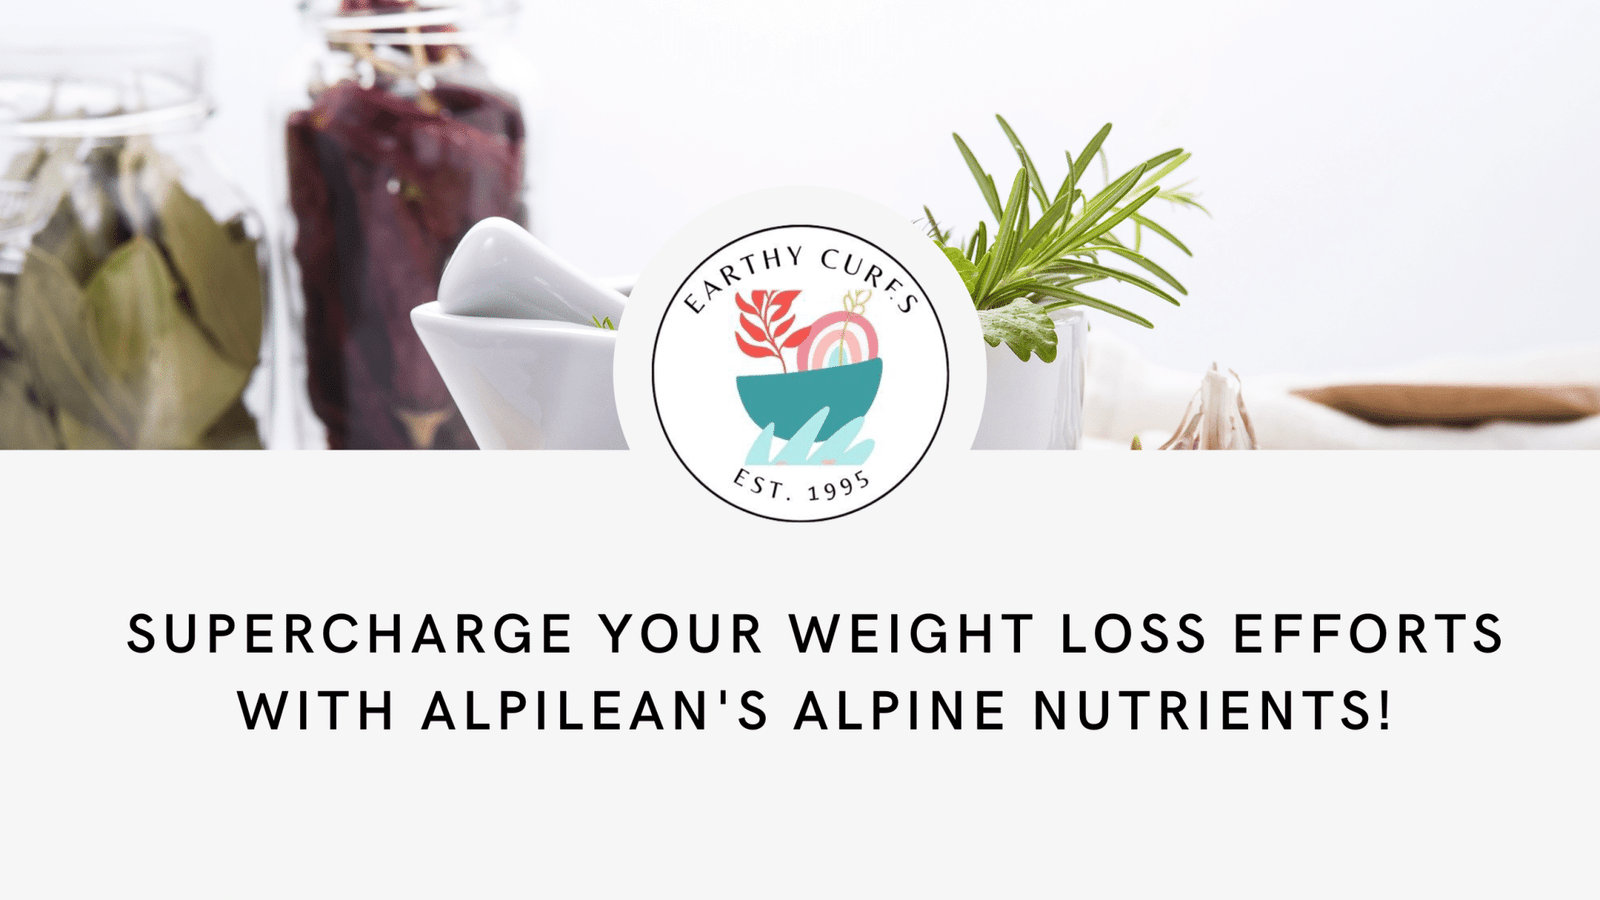 Supercharge Your Weight Loss Efforts with Alpilean's Alpine Nutrients!